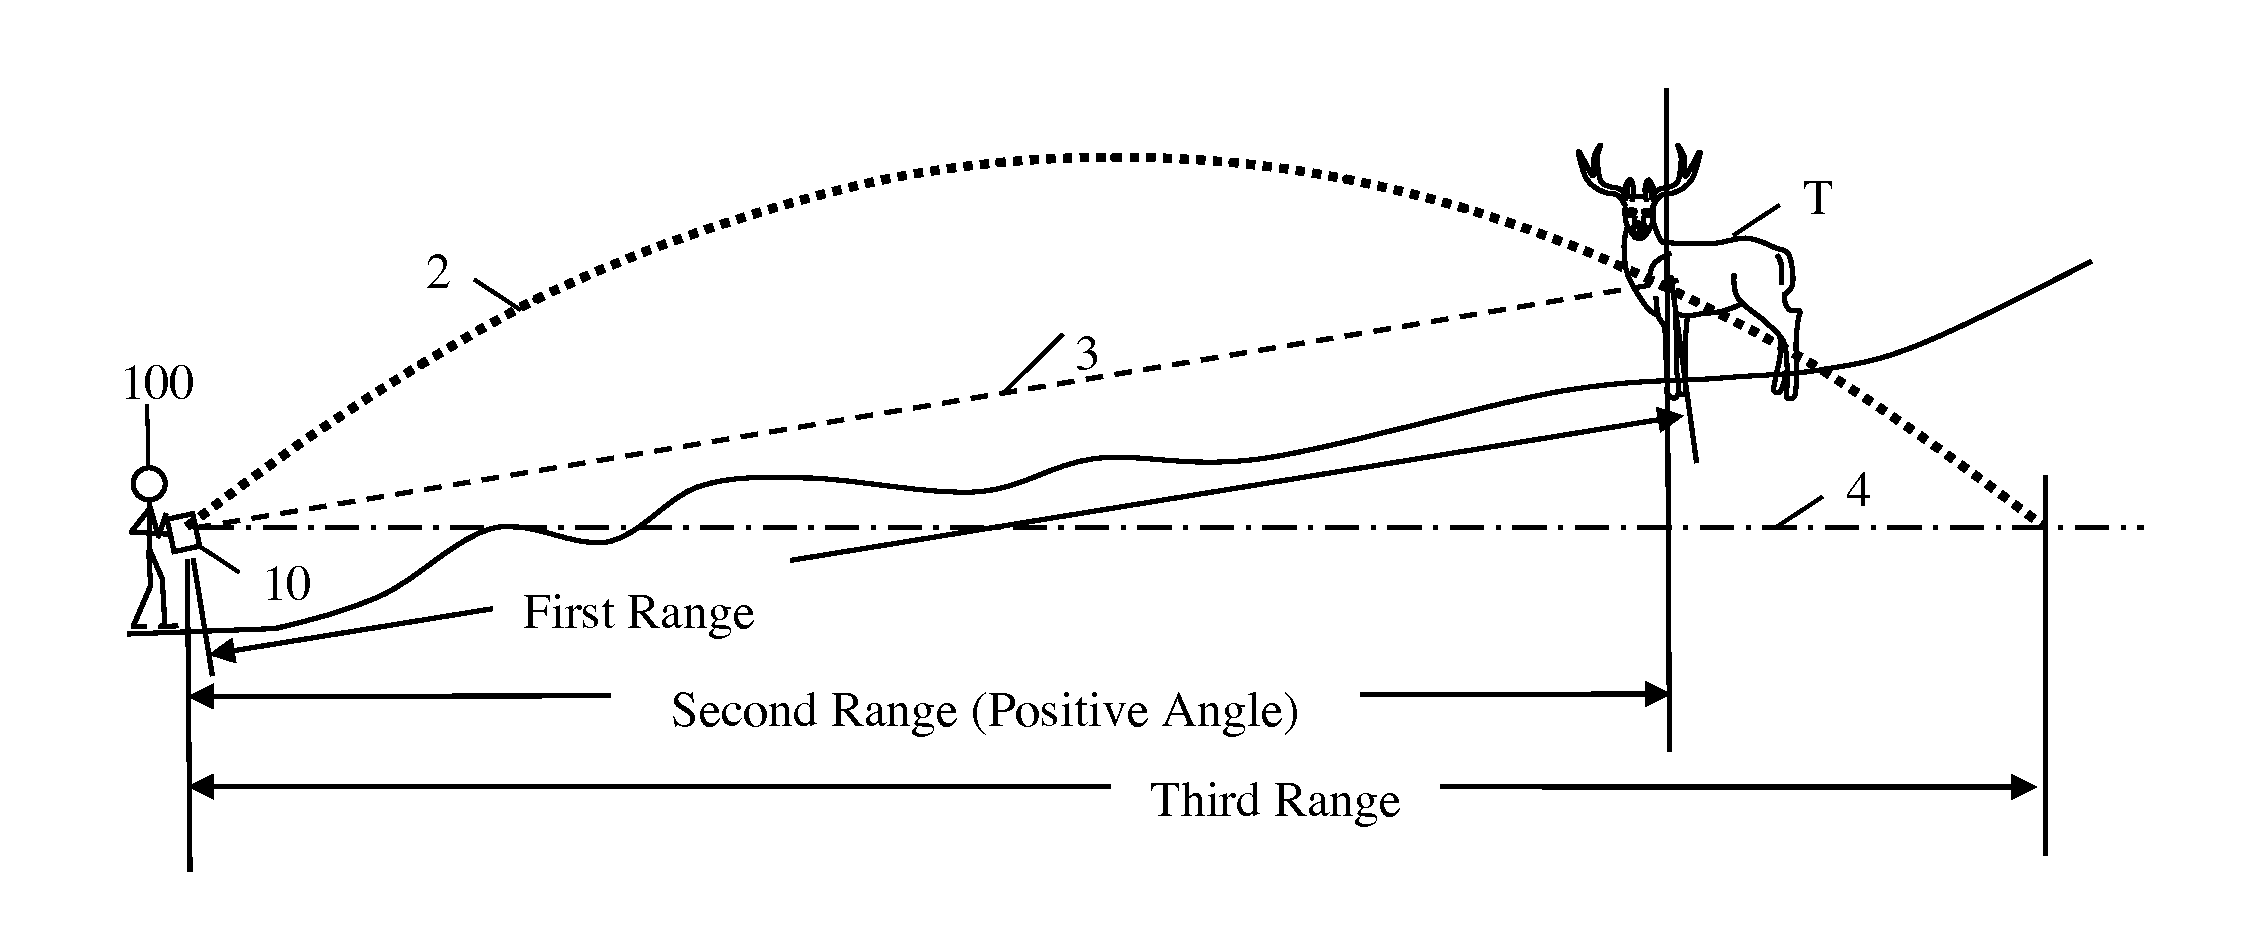 Display Indicating Aiming Point Using Intermediate Point in Trajectory Path